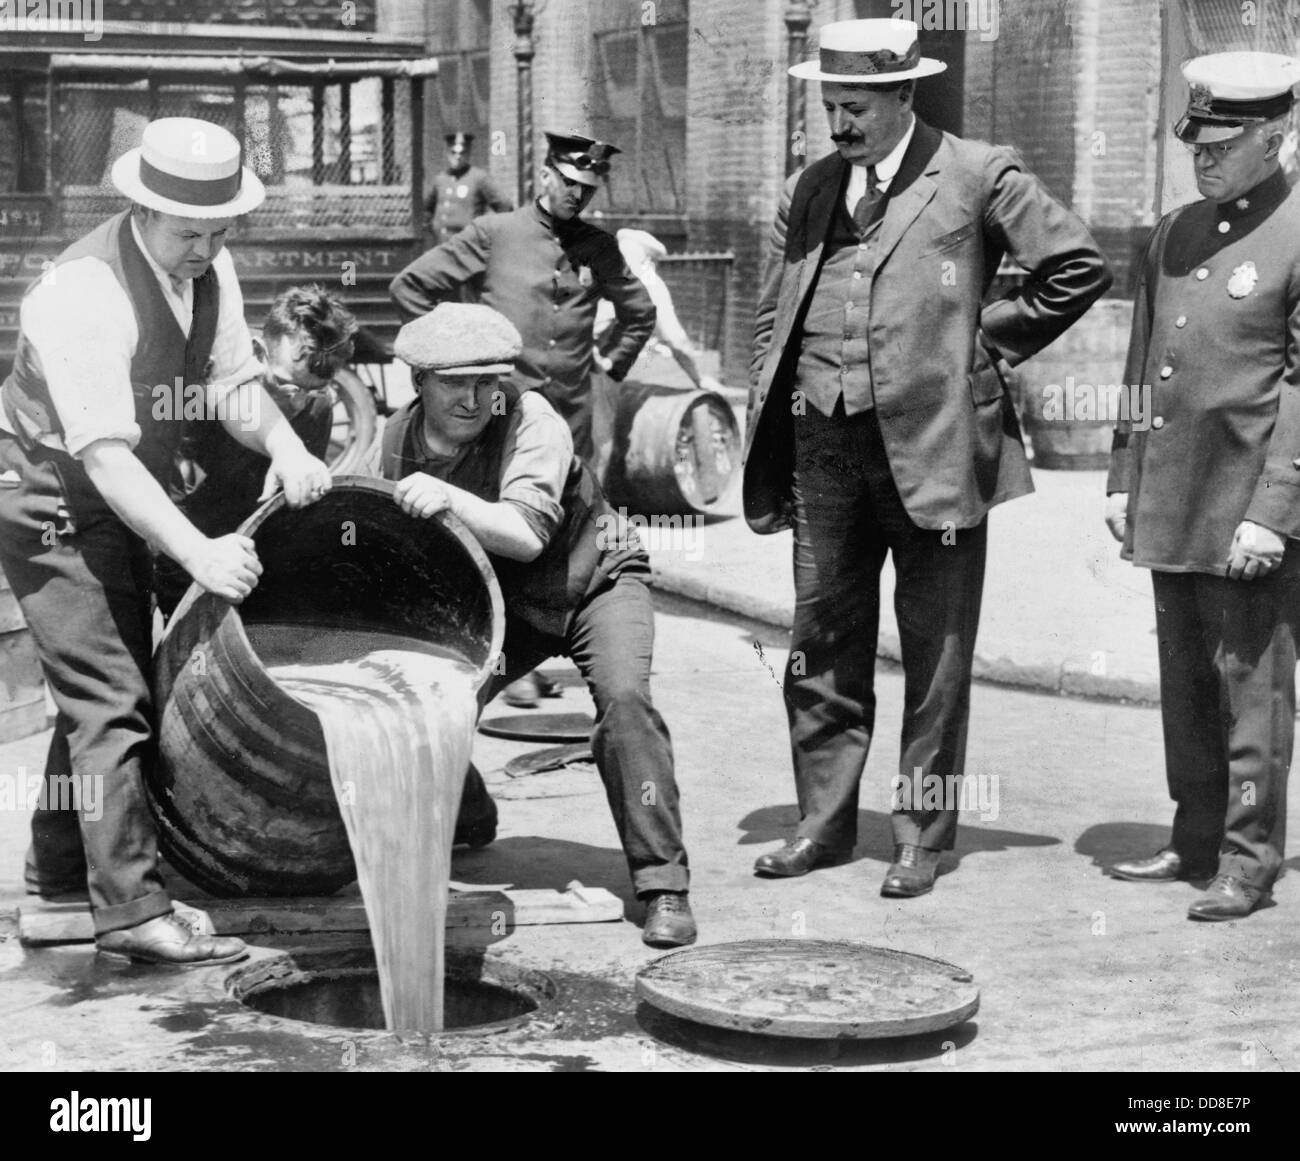 New York City Deputy Police Commissioner John A. Leach, right, watching agents pour liquor into sewer following a raid during the height of prohibition, 1921 Stock Photo